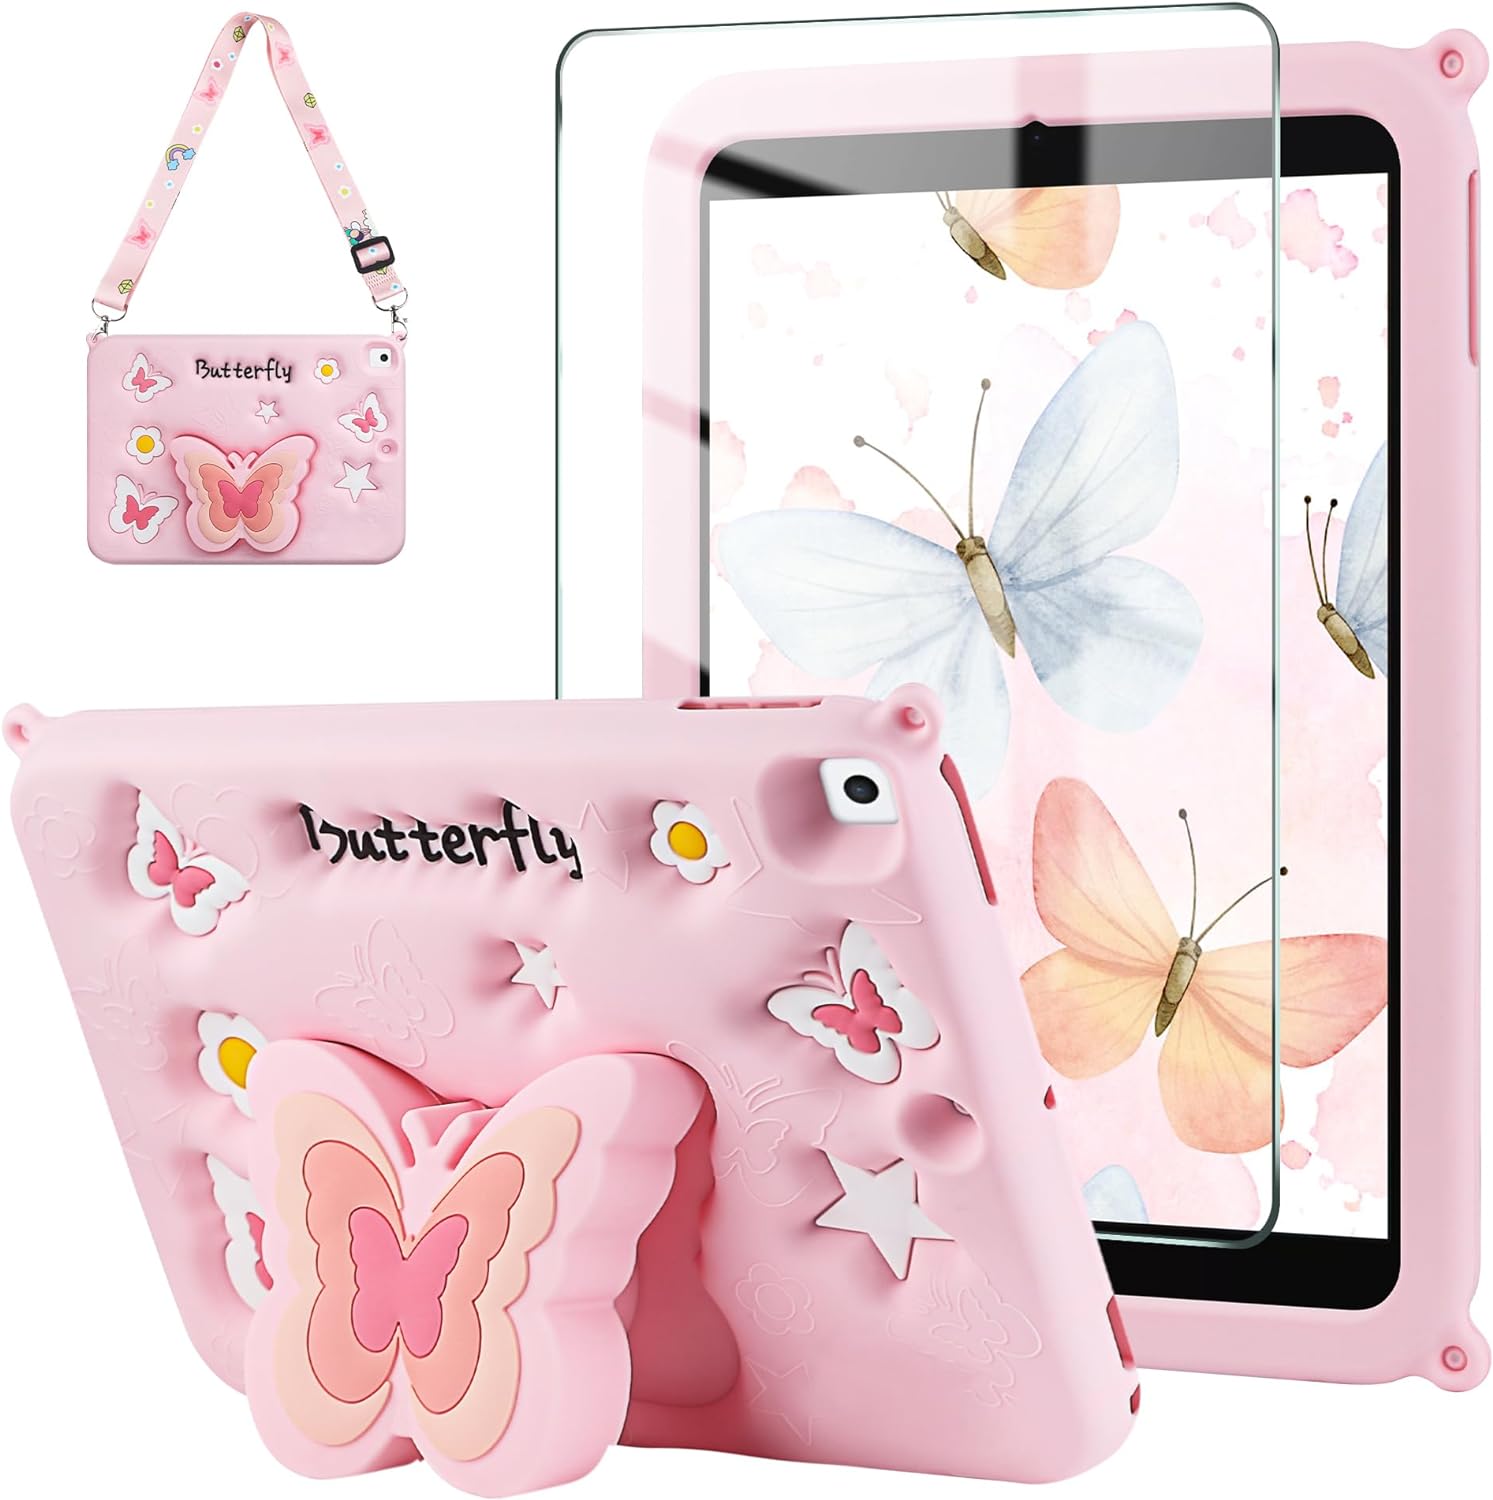 Wollony for iPad 9th 8th 7th Generation Case iPad 10.2 Case with Screen Protector Shoulder Strap Butterfly Wings Stand Cute Cartoon Silicone Cover Case Girls Kids for iPad 9th/8th/7th Gen 10.2 Pink